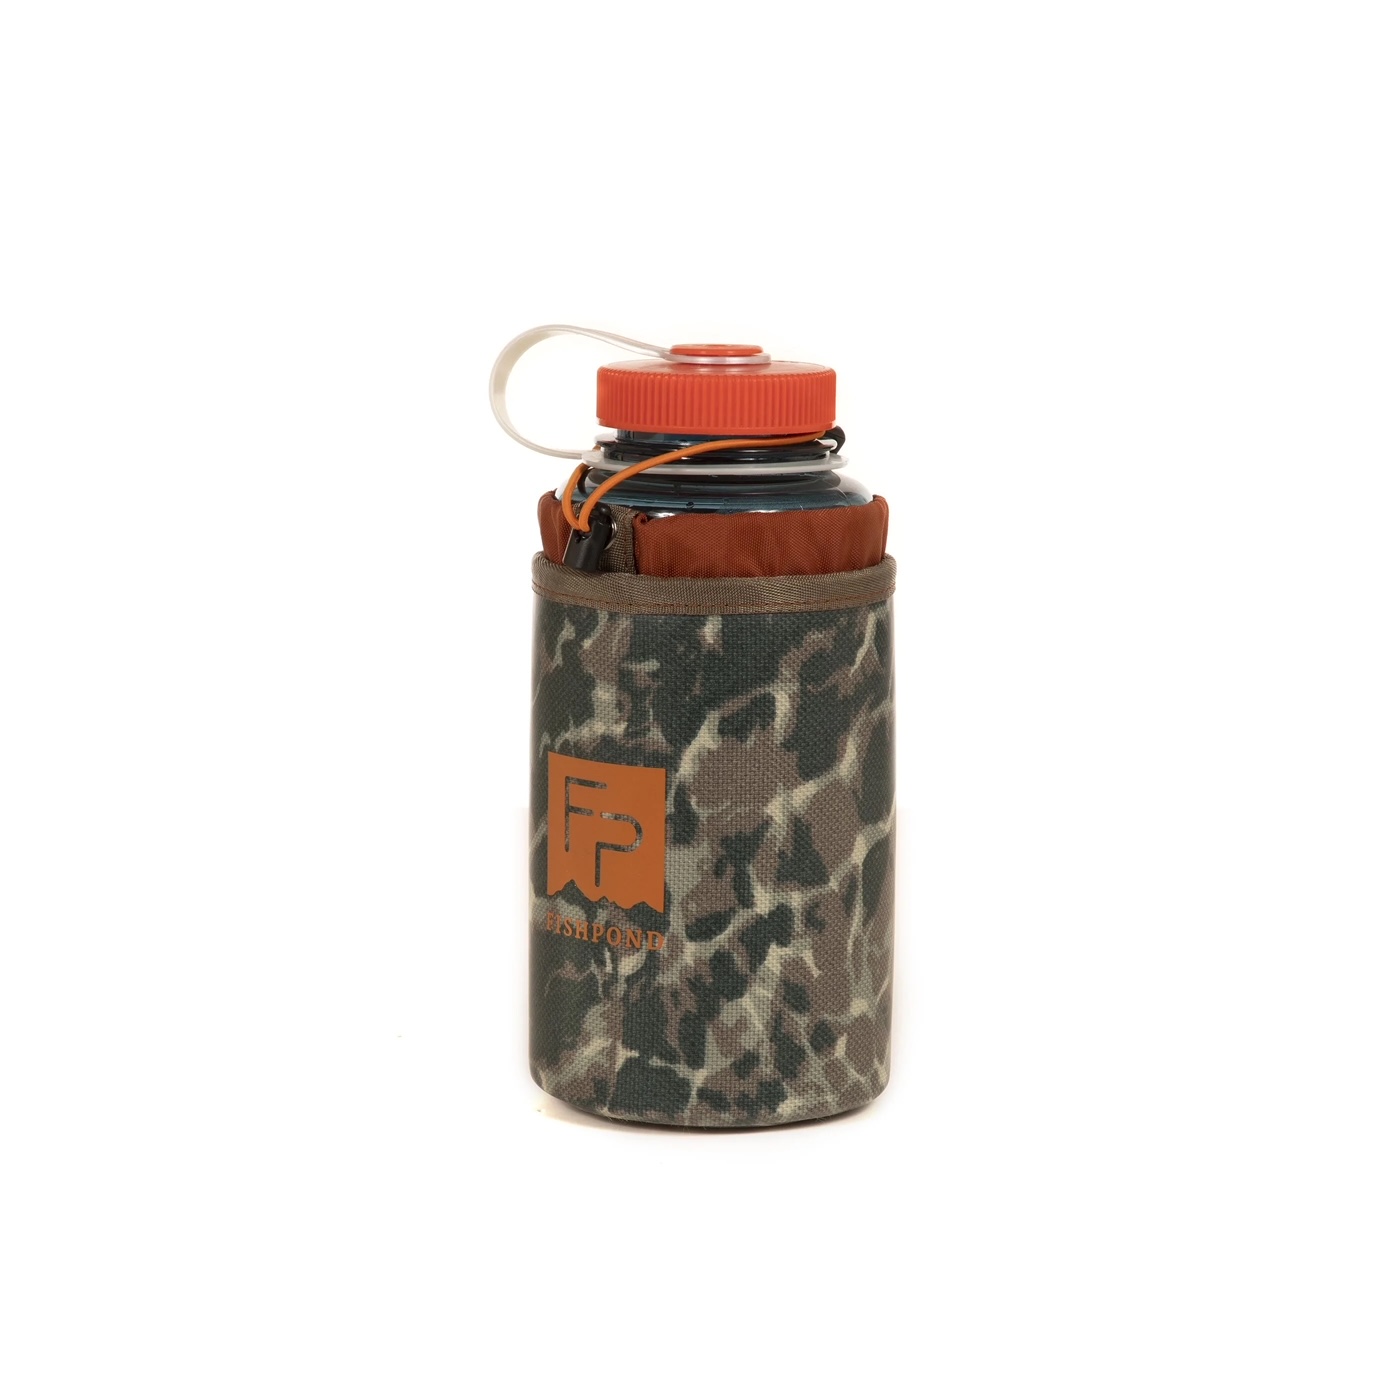 Fishpond Thunderhead Water Bottle Holder - Eco Riverbed Camo